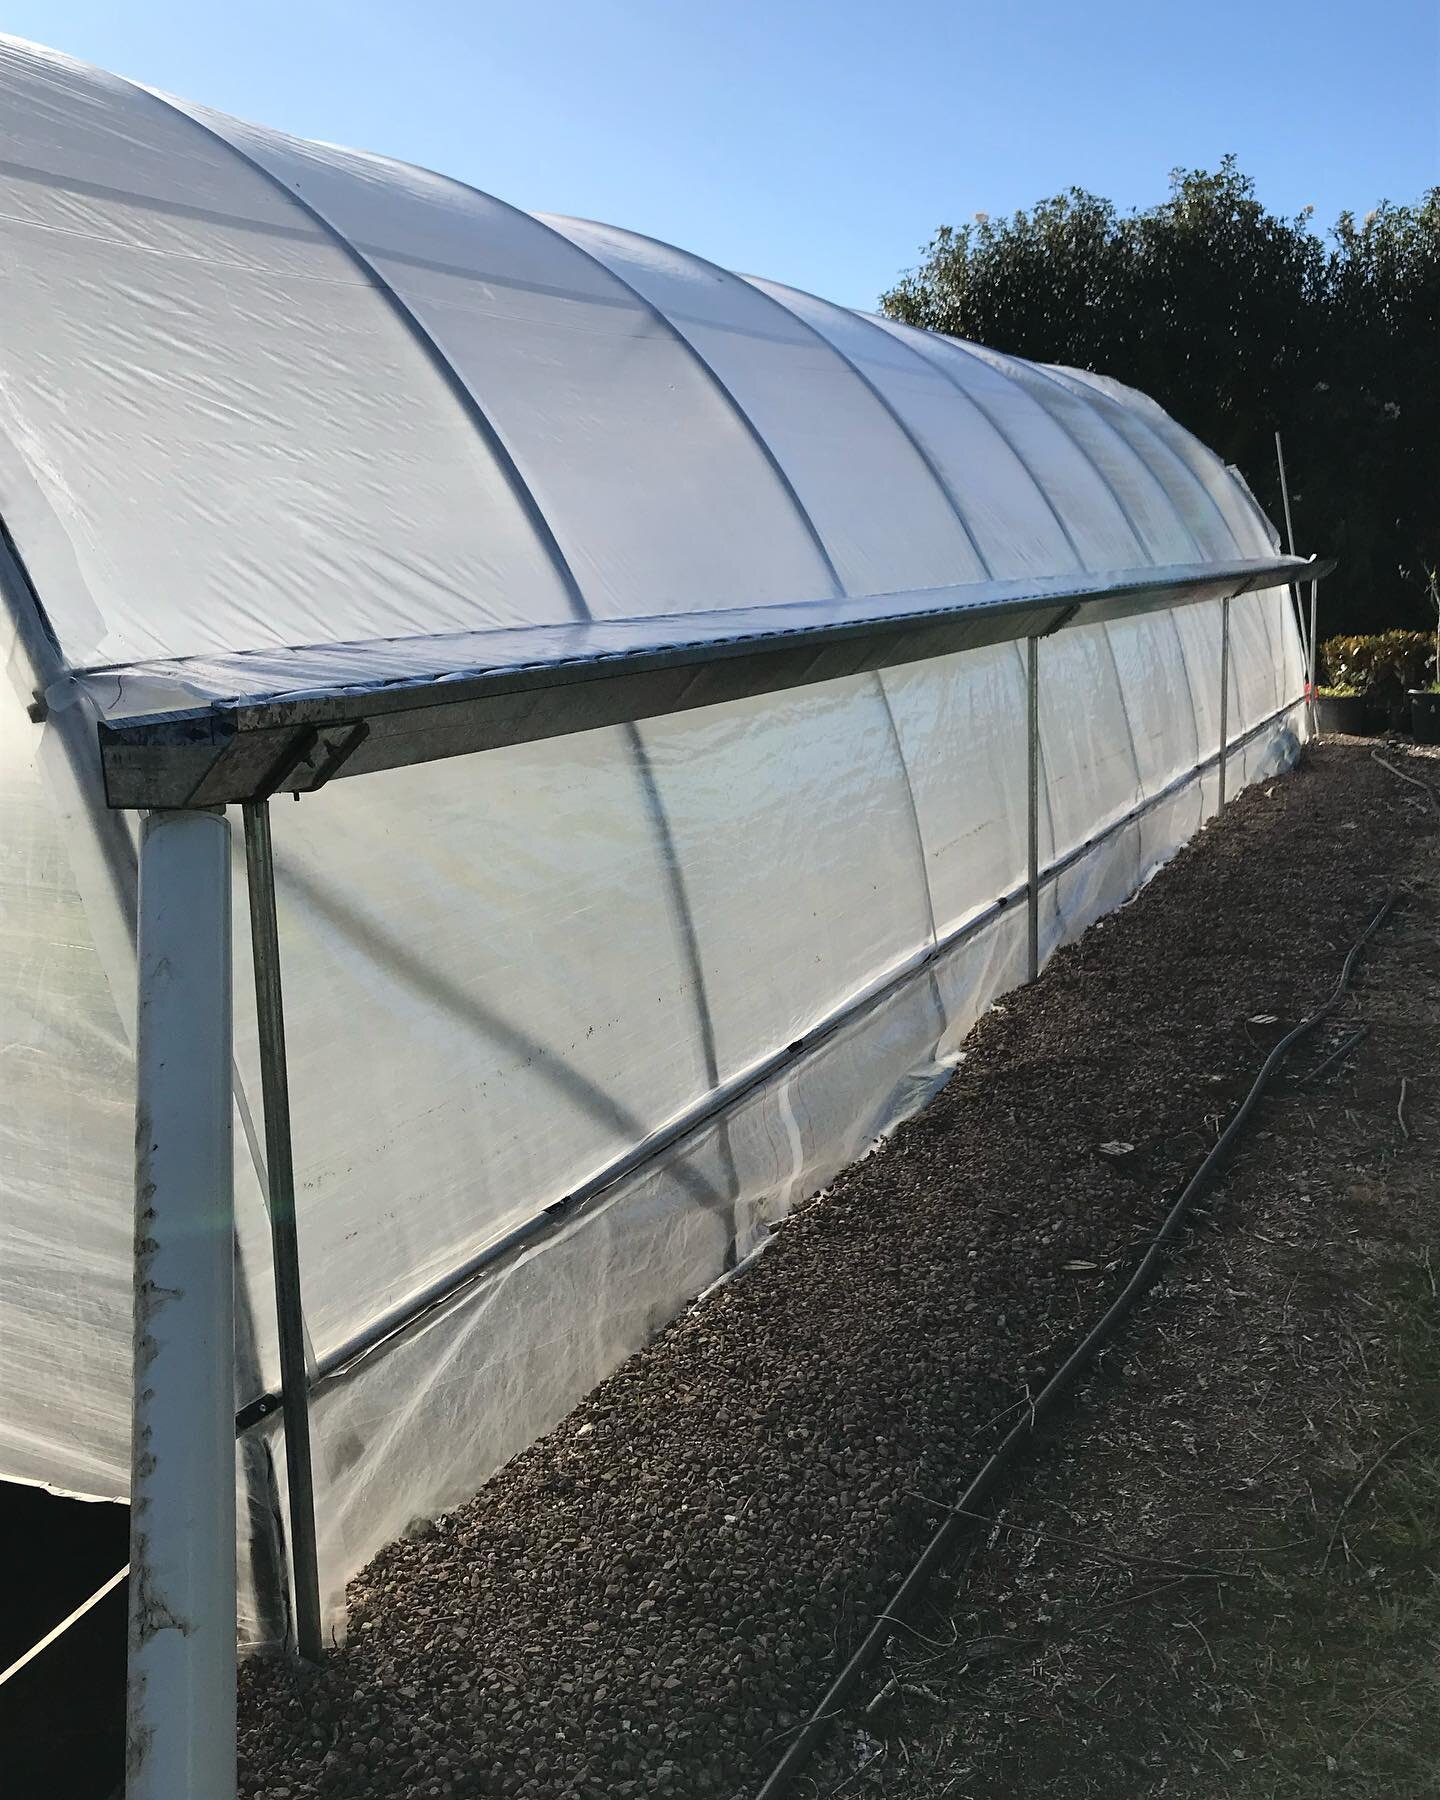 Did you know we also supply spare parts and carry out repairs on old and damaged growtunnels? From gutter installations or new roof covers we can help.